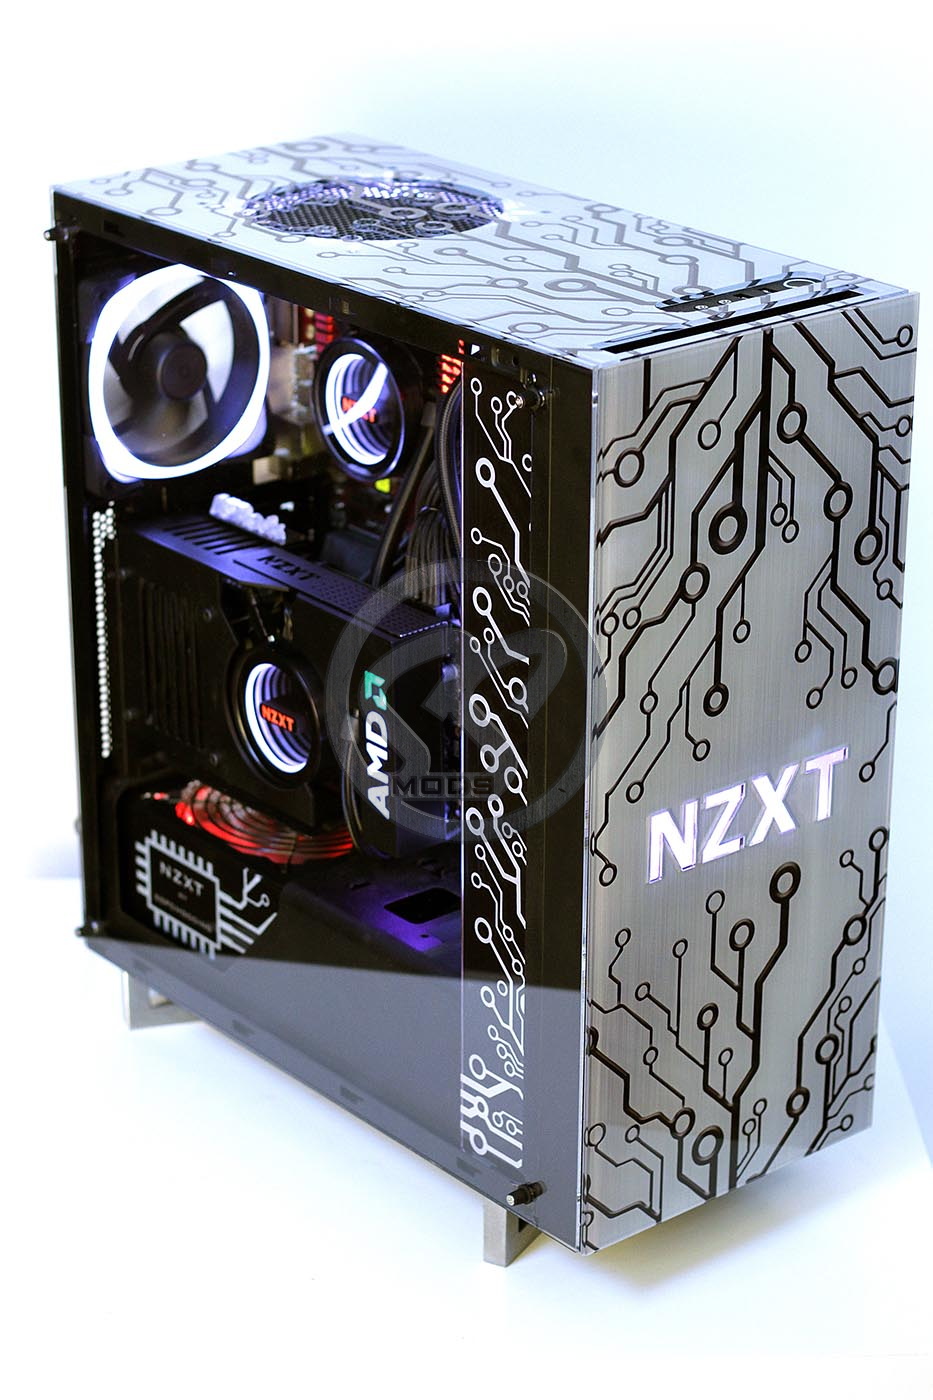 NZXT-mod-by-SS-03-small